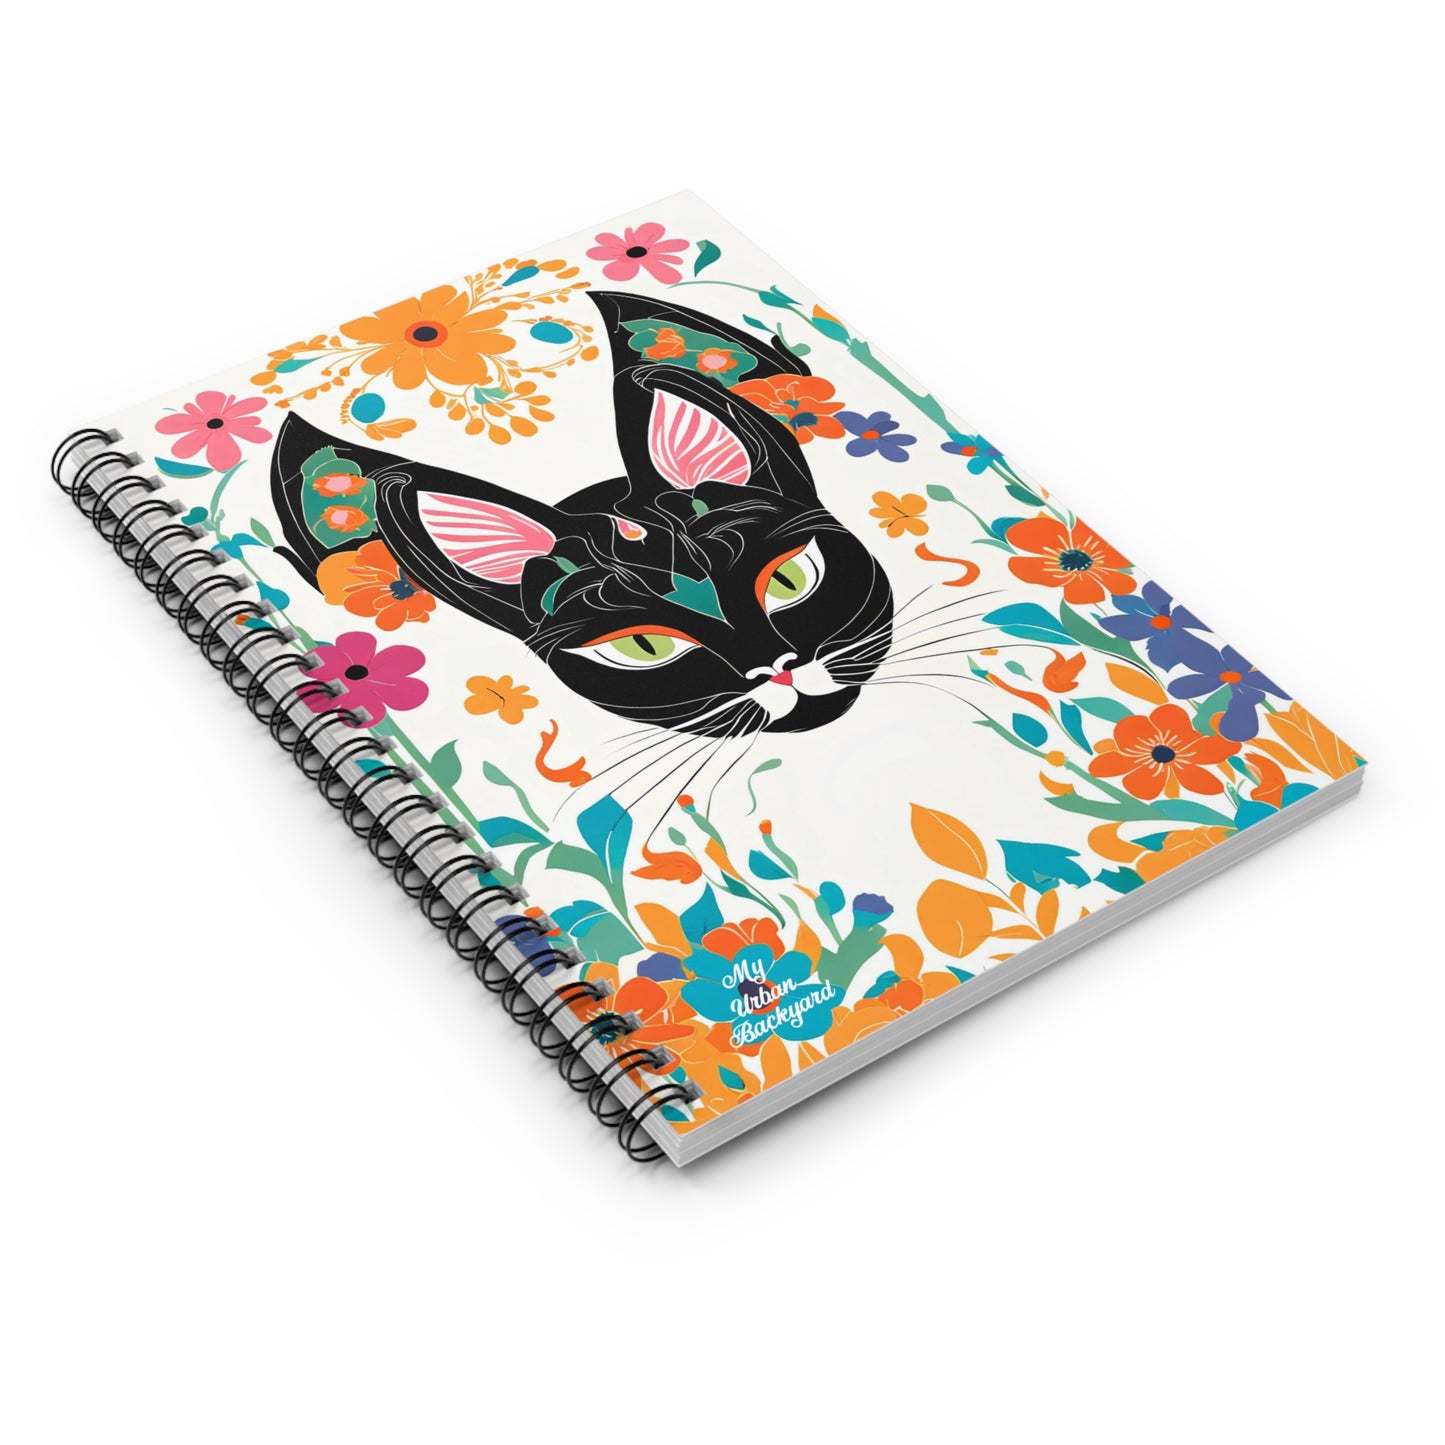 Black Cat with Green Eyes & Flowers, Spiral Notebook Journal - Write in Style